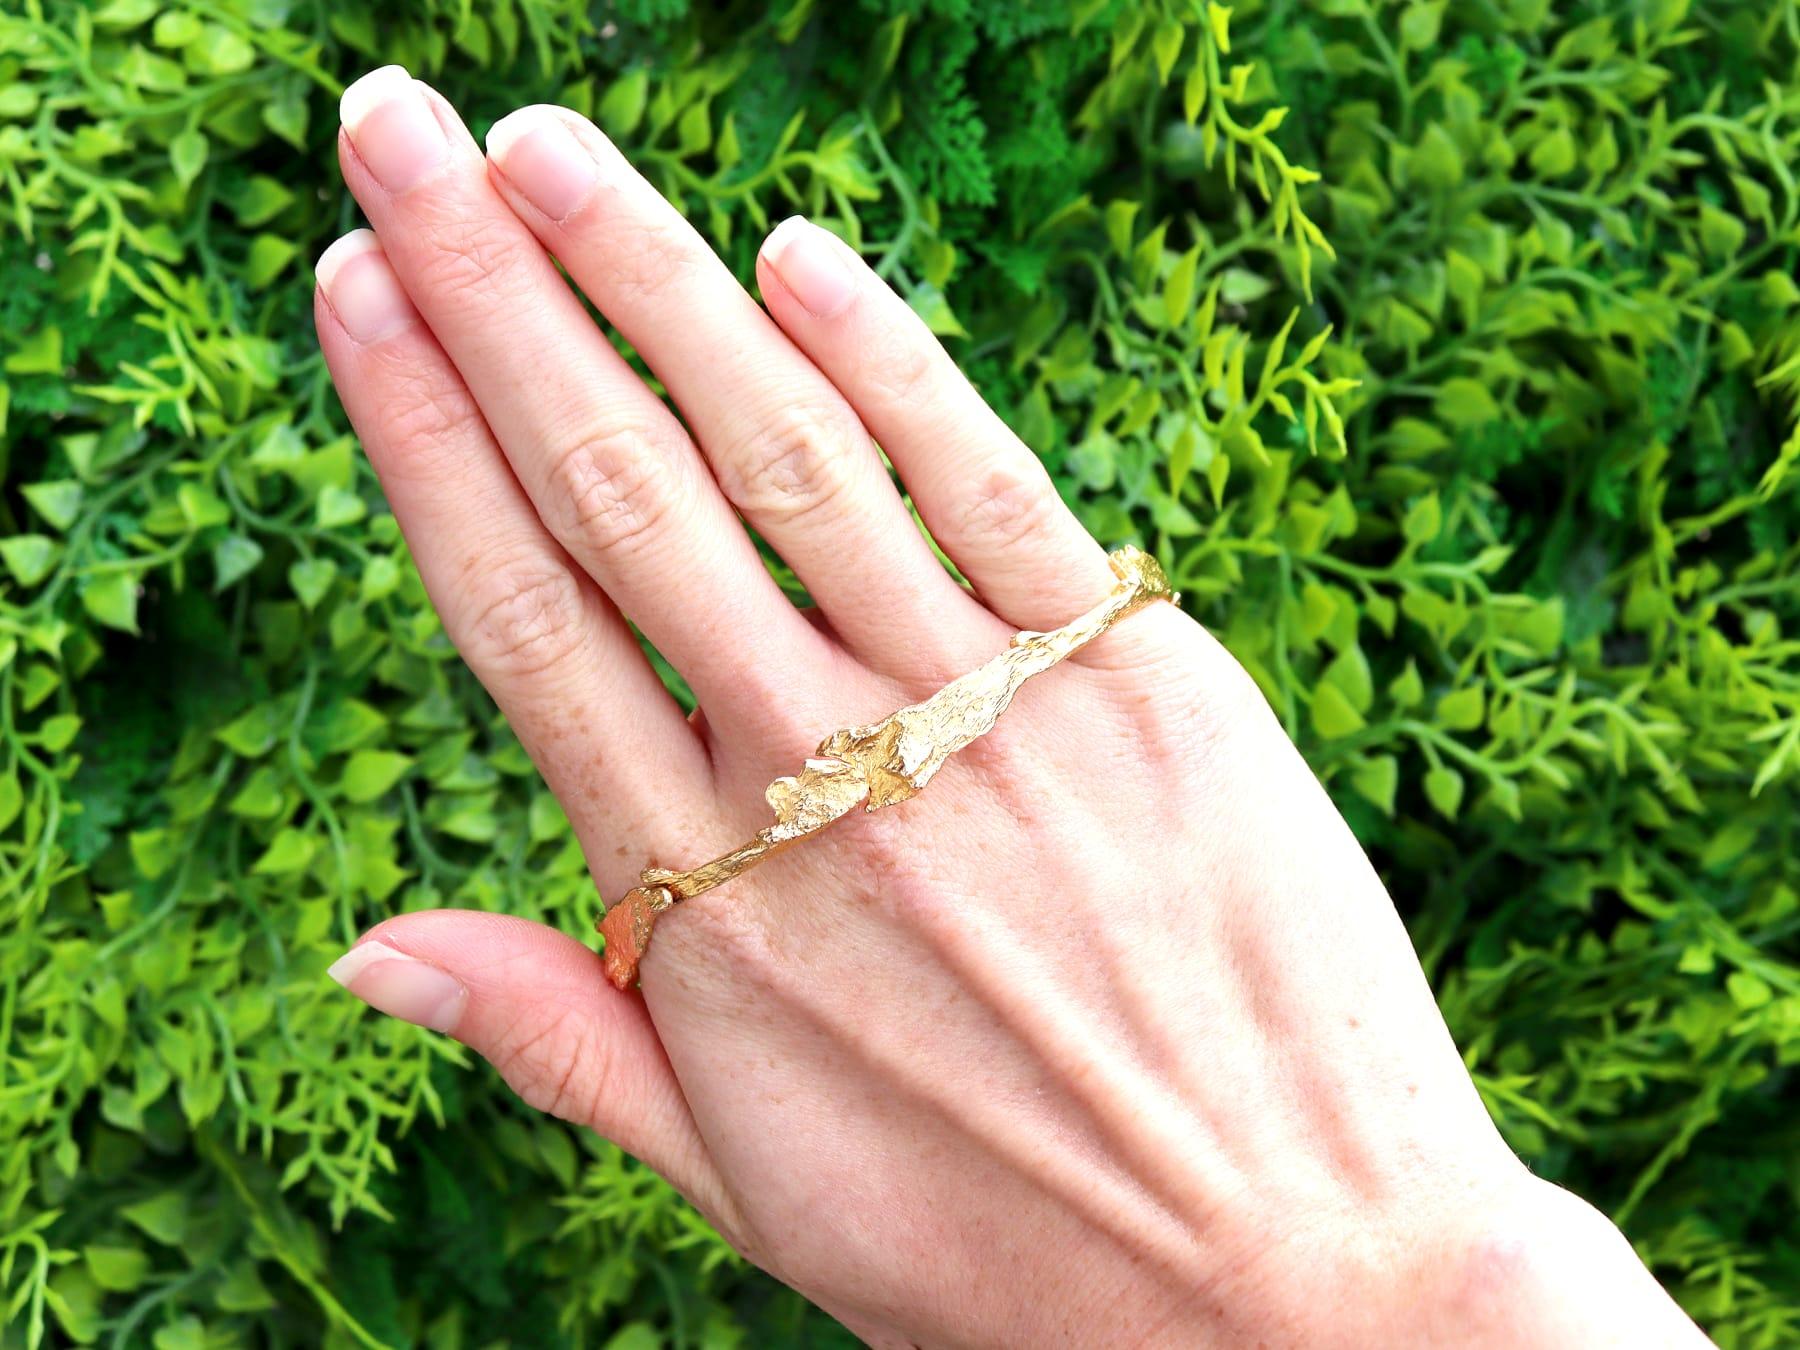 This exceptional, fine and impressive vintage gold bracelet has been crafted in 14k yellow gold.

The substantial fully articulated bracelet consists of a multitude of organic shaped links, realistically modeled in the form of tree bark/rhytidome